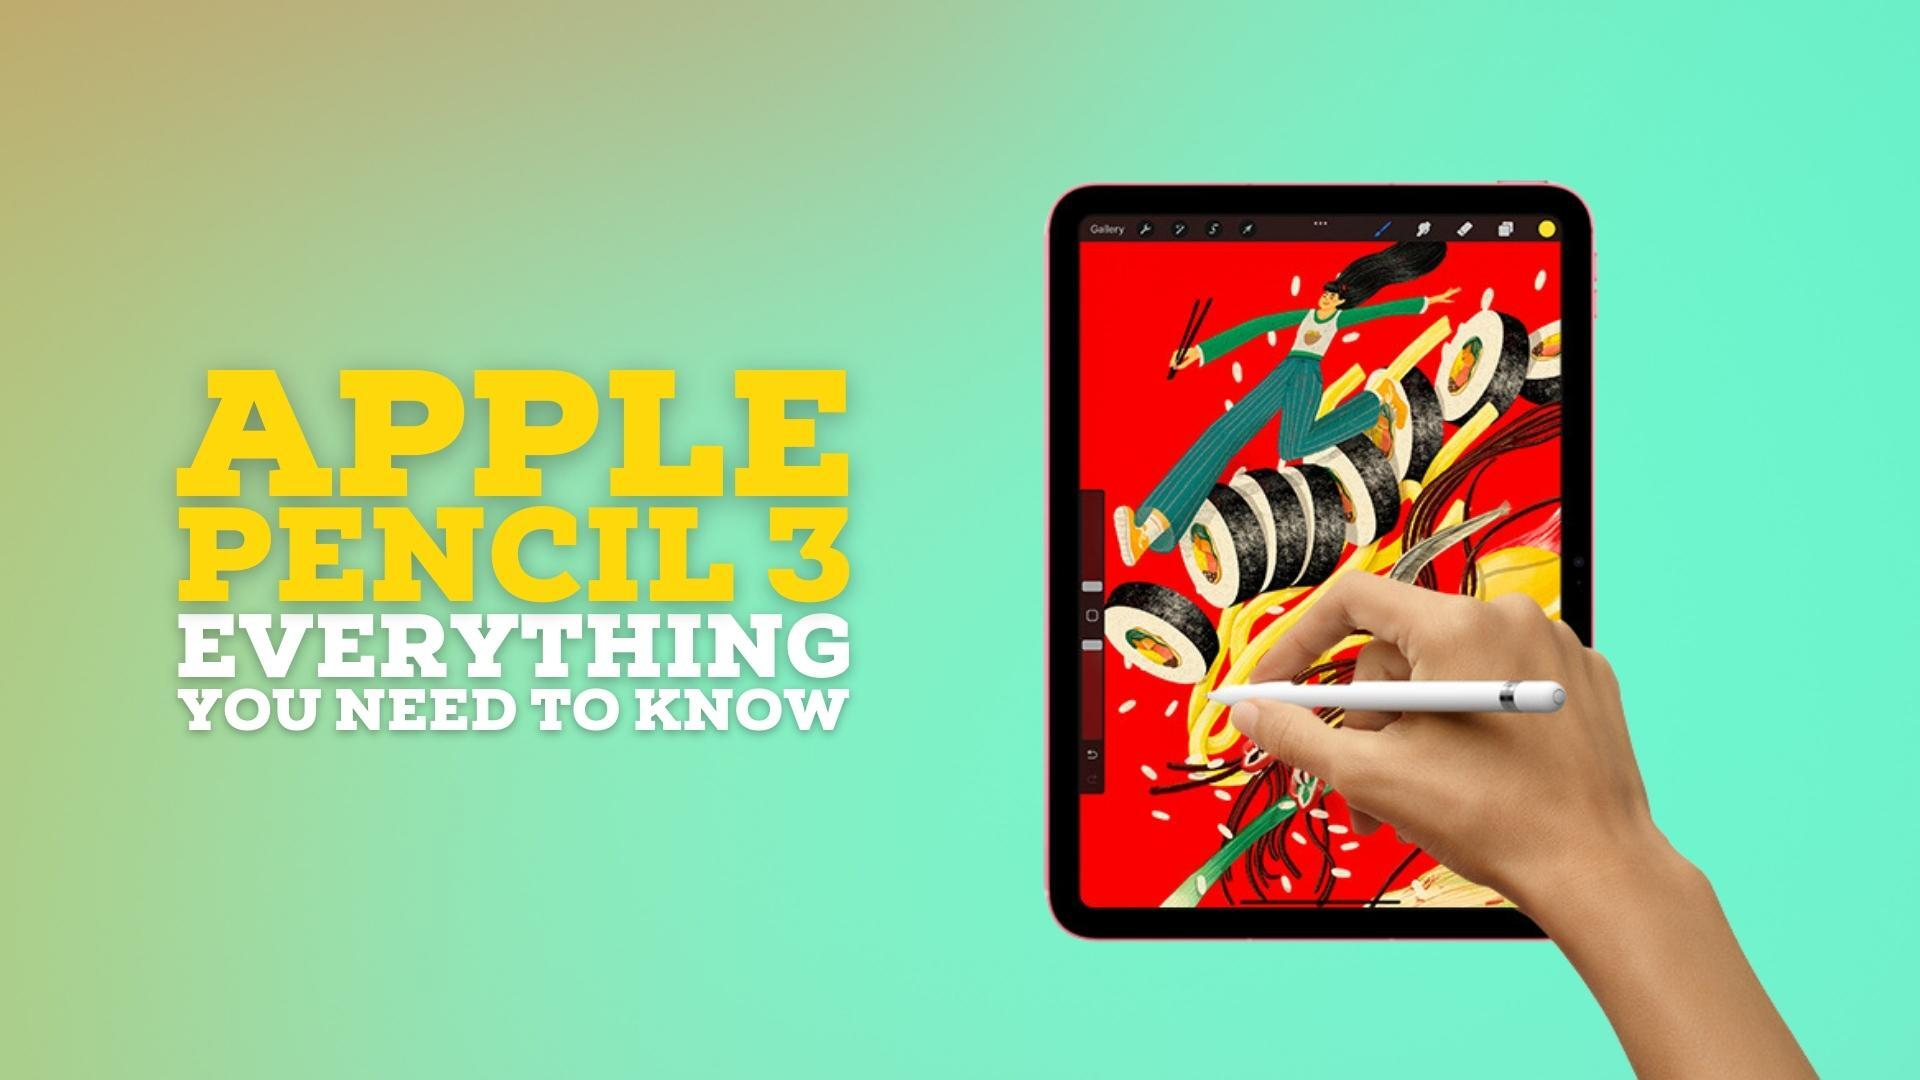 Will the Apple Pencil 3 add to the lineup or be a replacement? - 9to5Mac